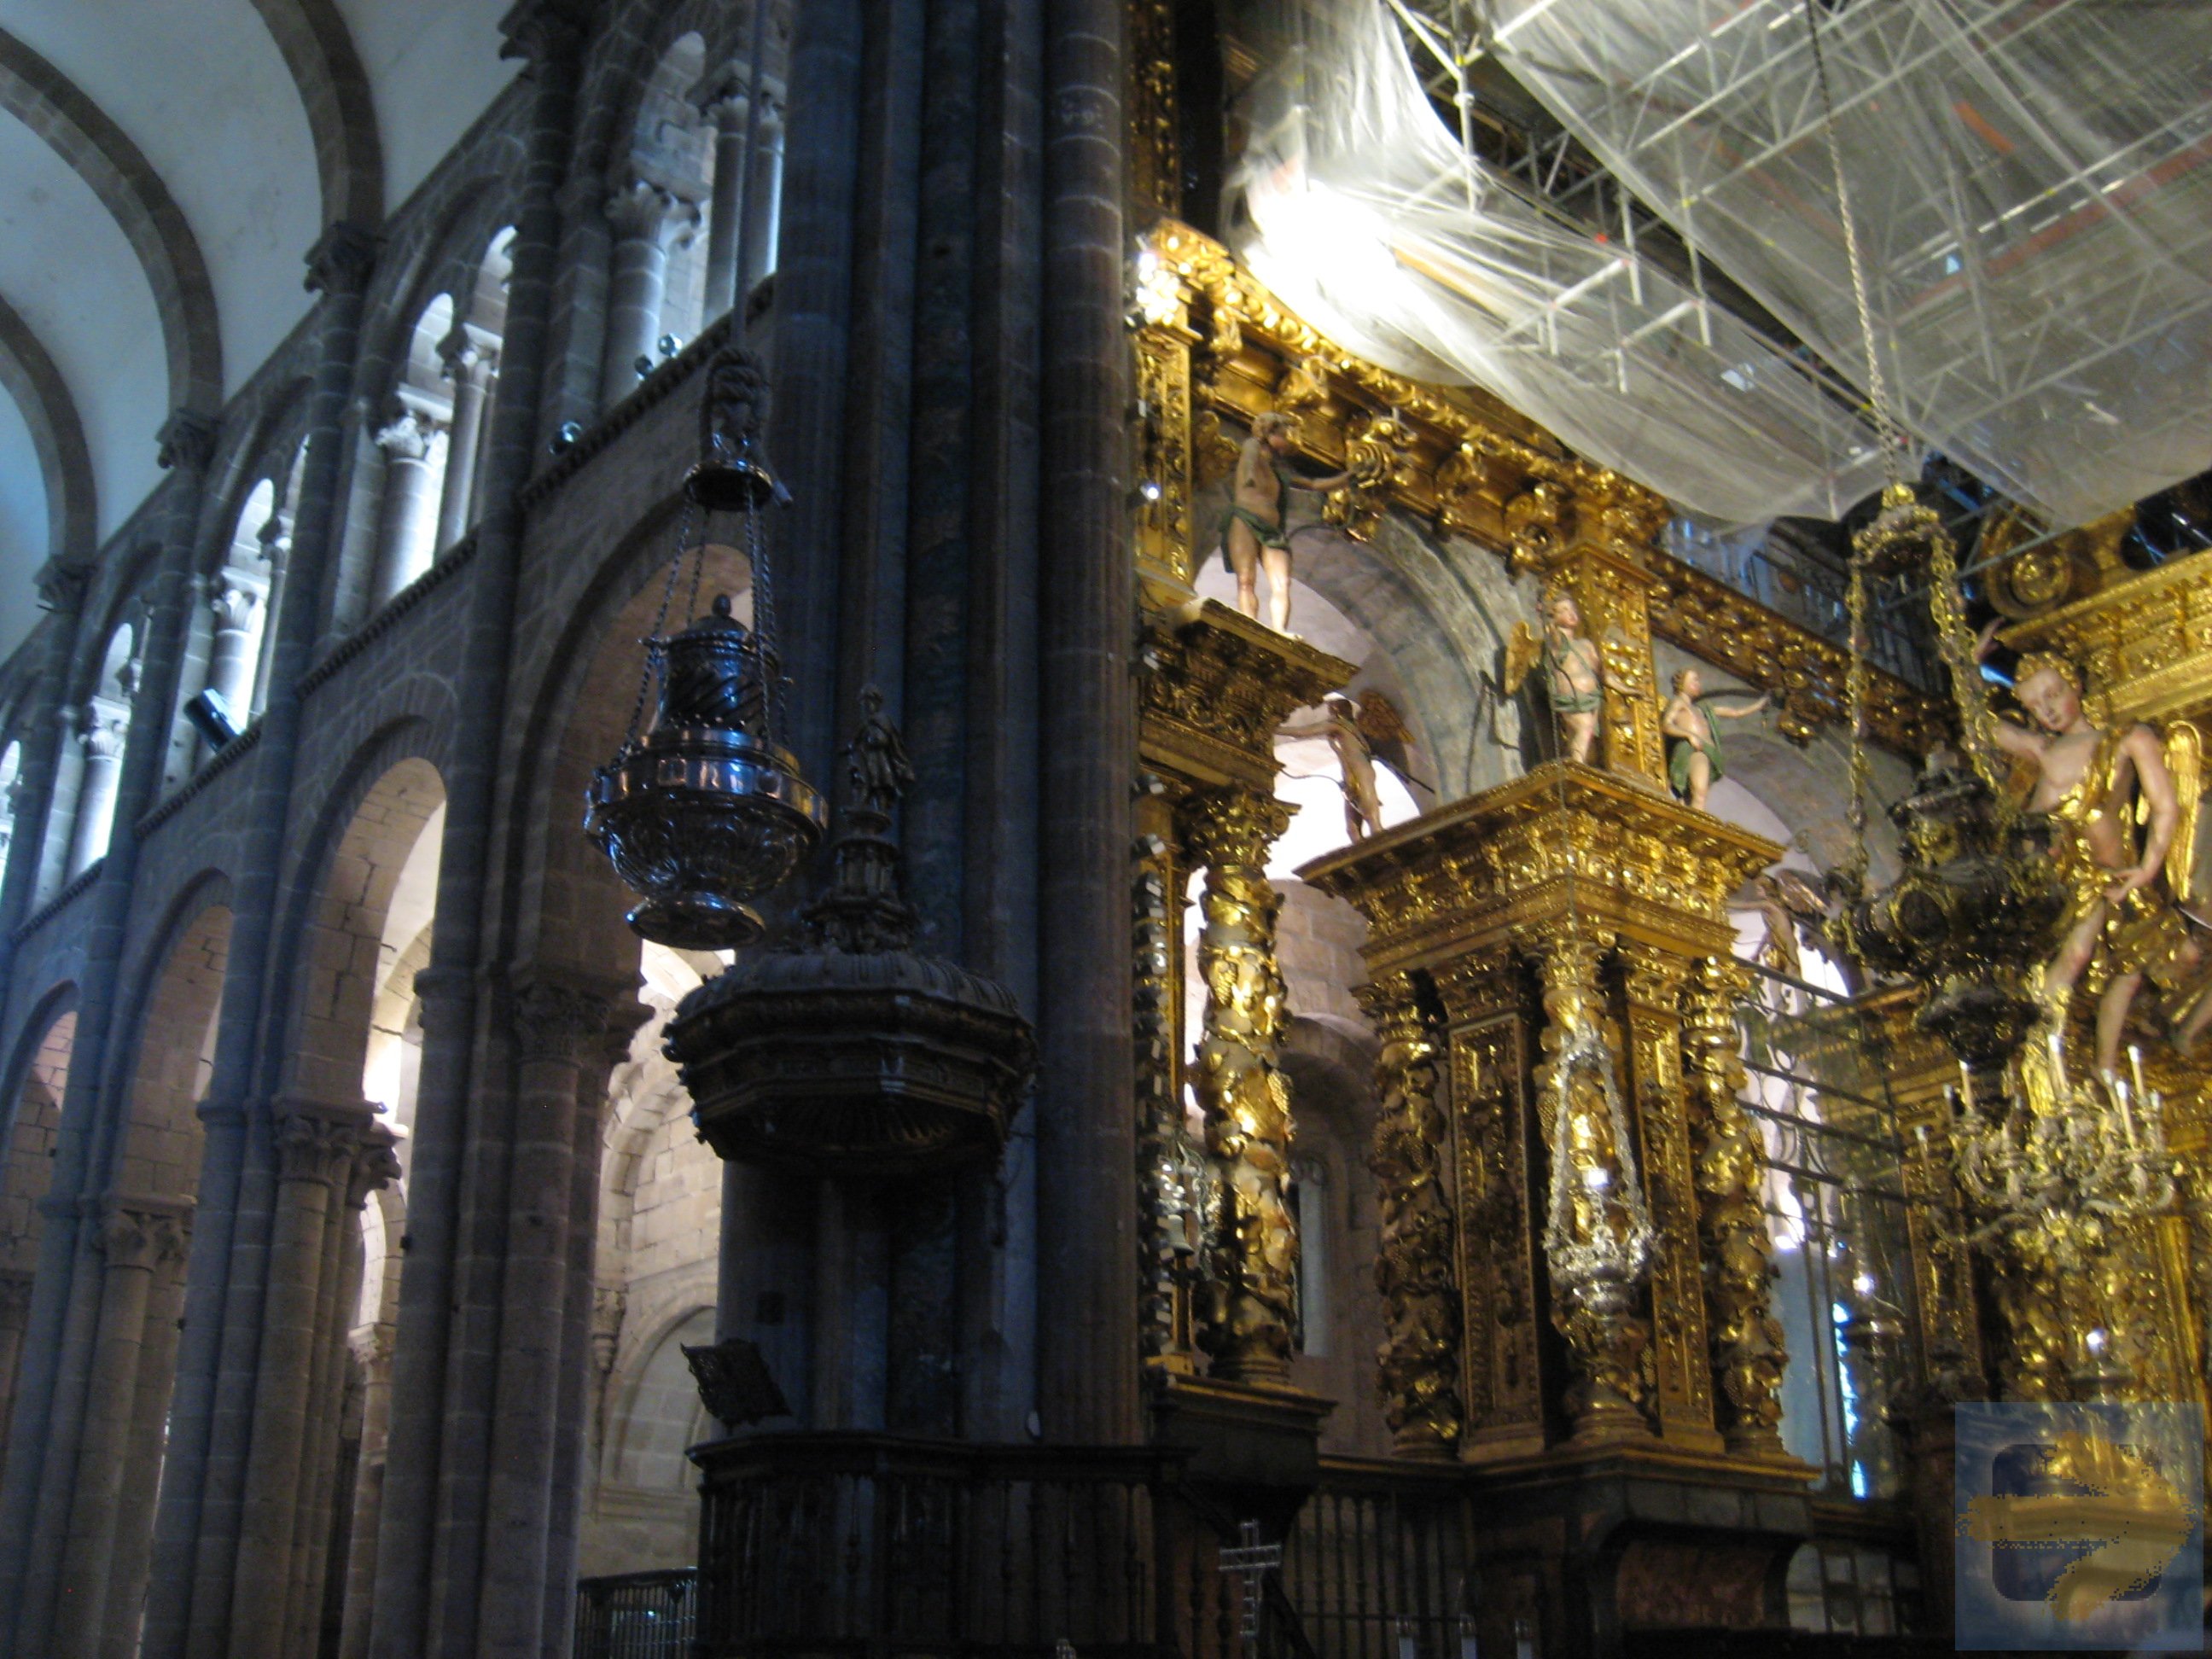 in the cathedral